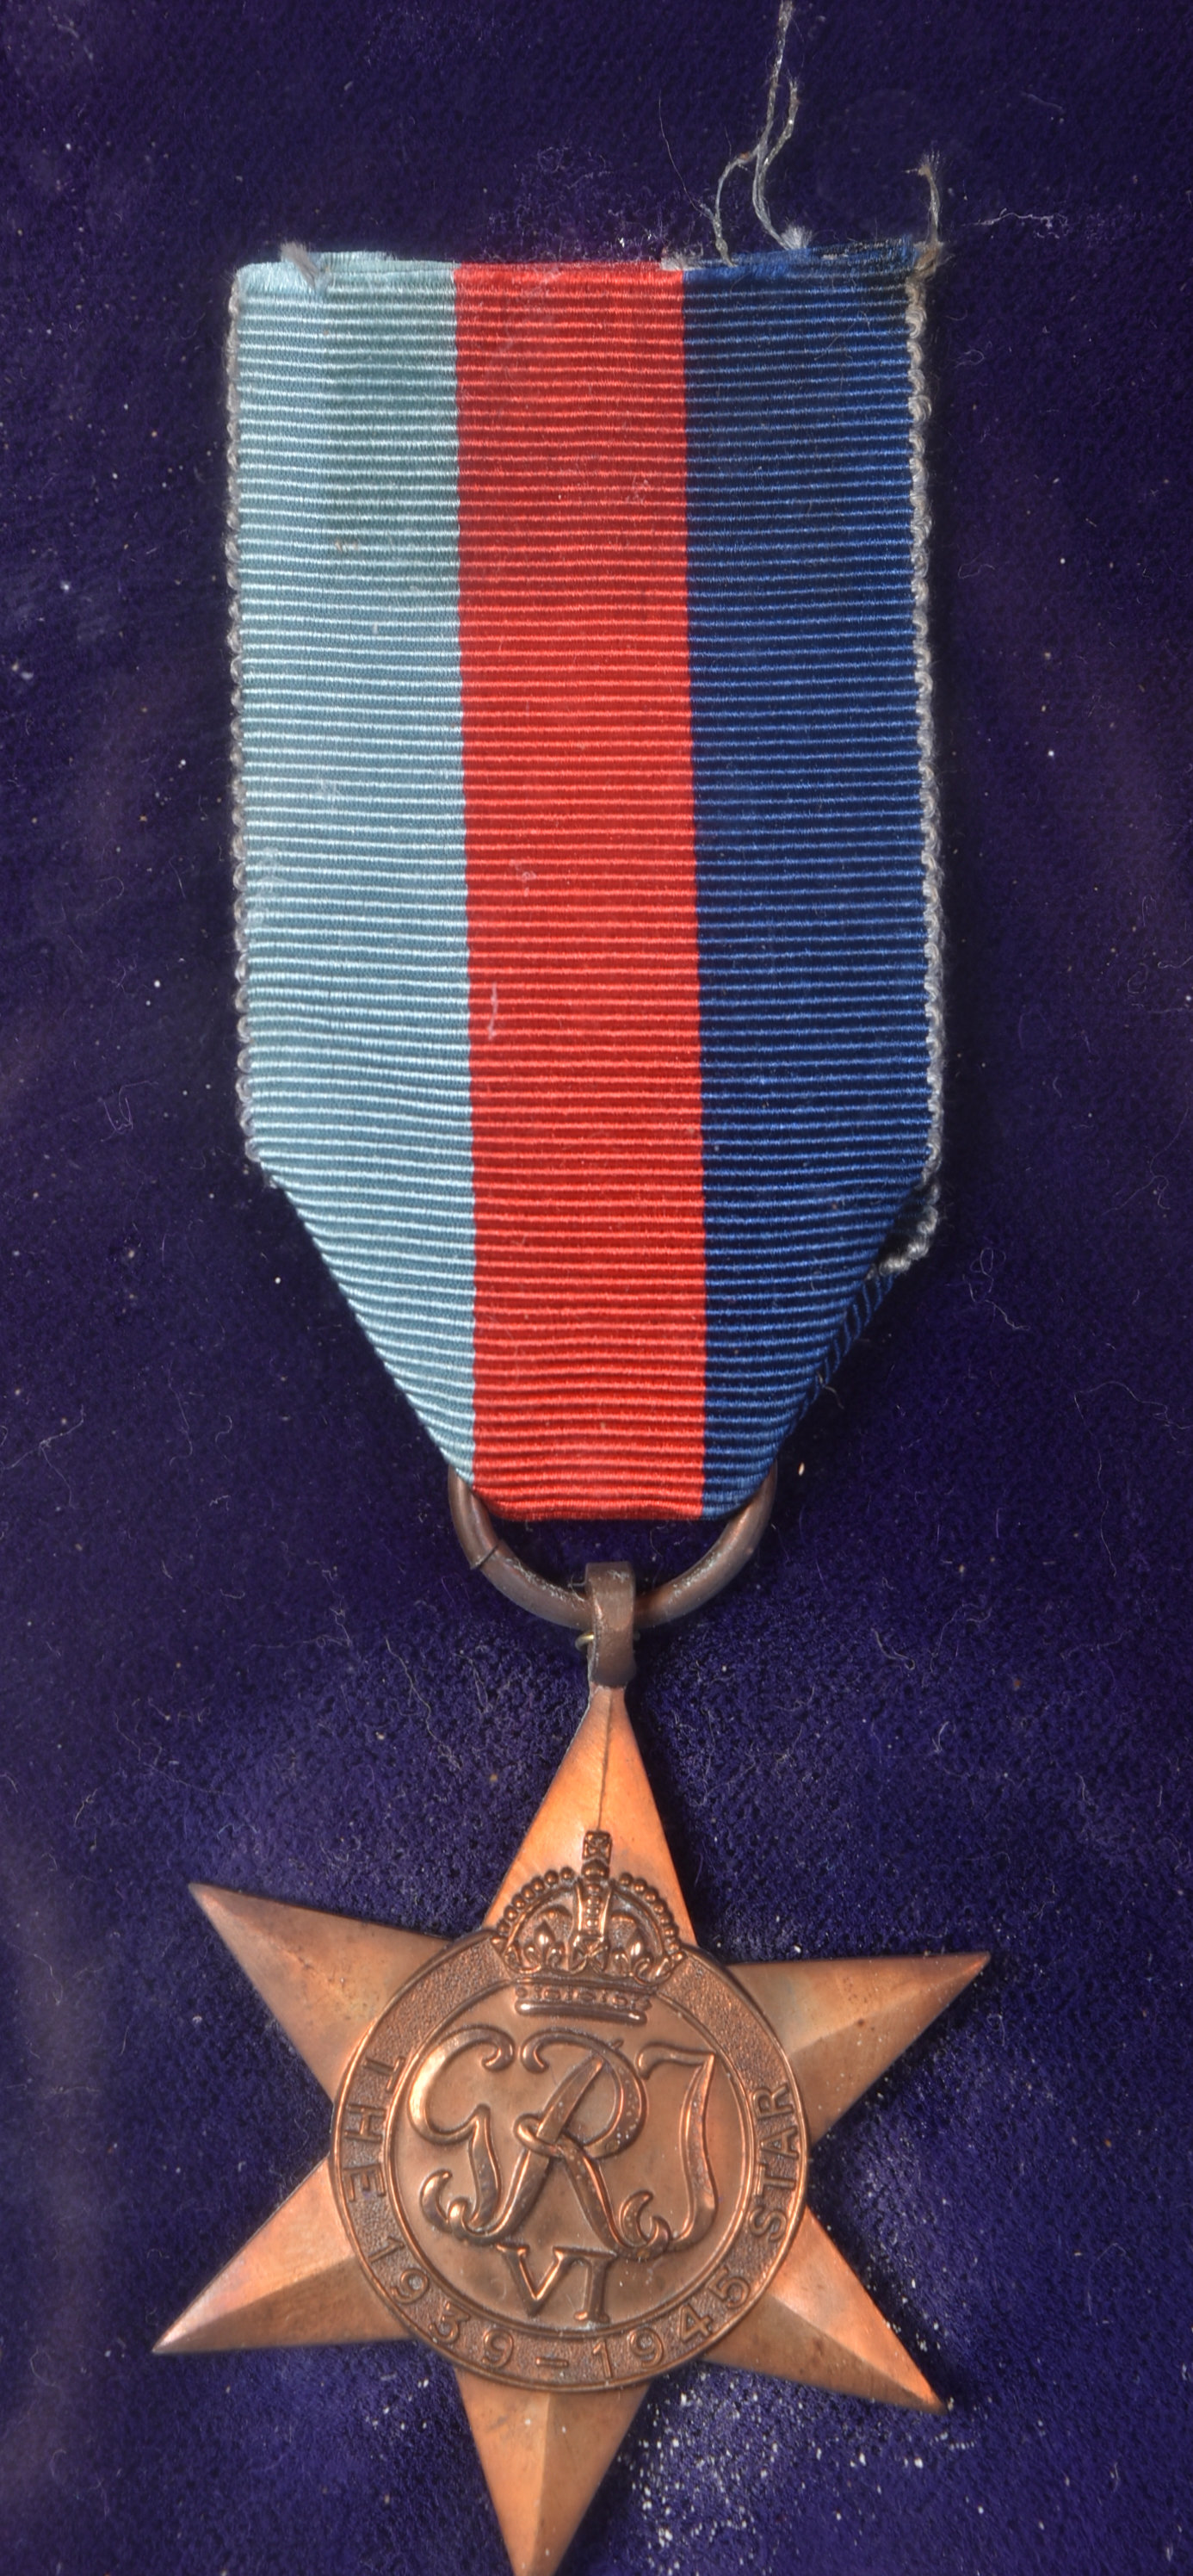 WWII SECOND WORLD WAR MEDAL TRIO - R. KELLY ROYAL NAVY - Image 6 of 8